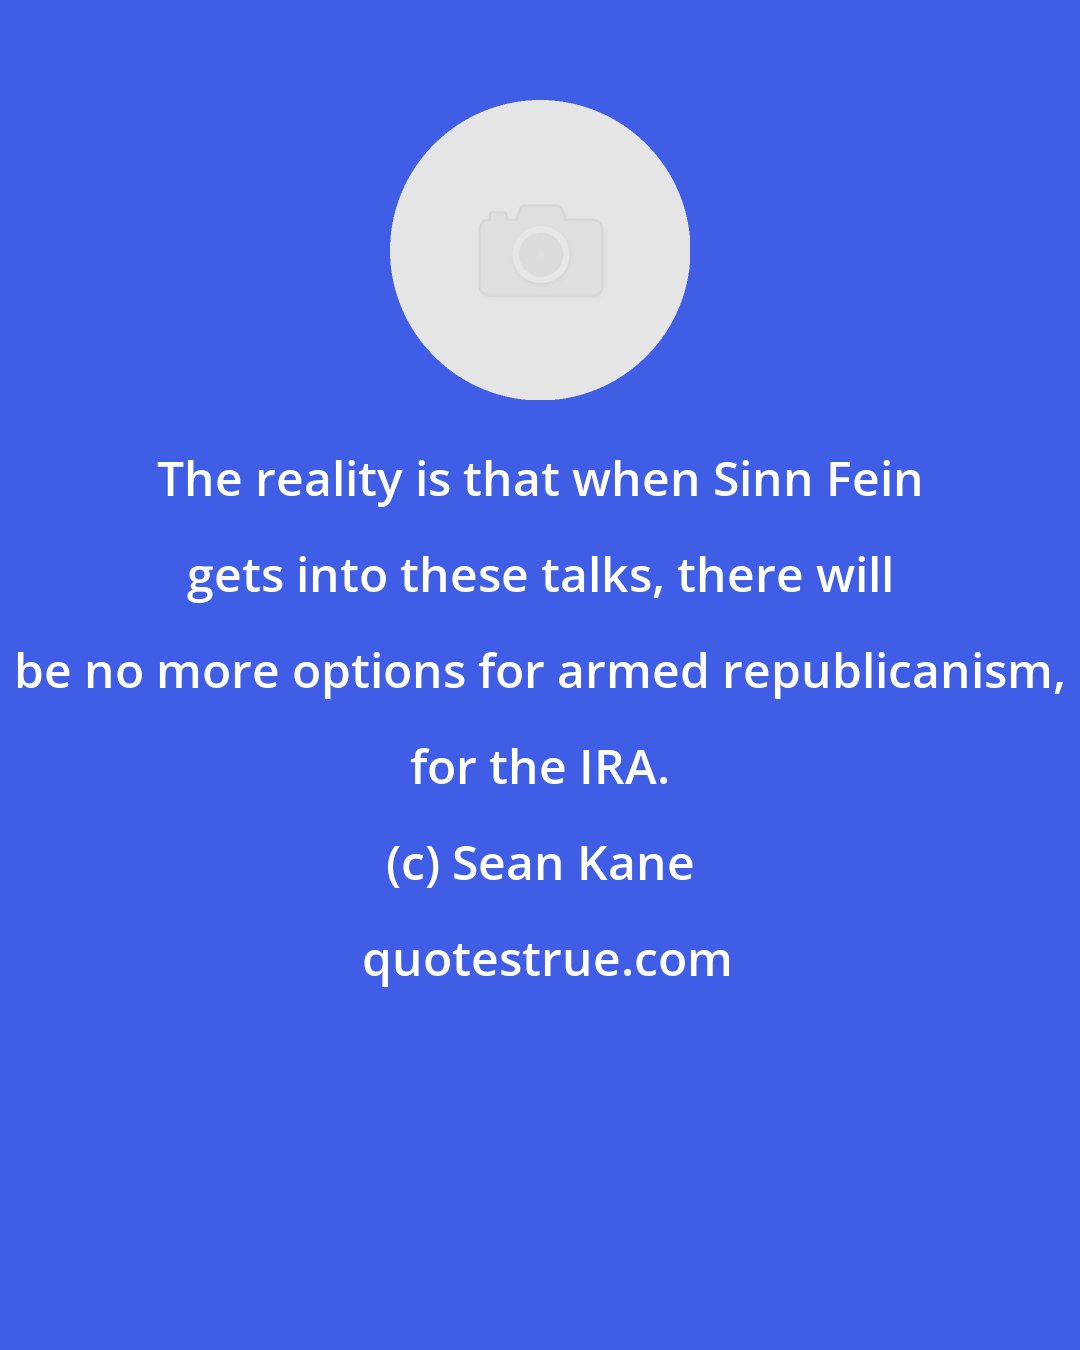 Sean Kane: The reality is that when Sinn Fein gets into these talks, there will be no more options for armed republicanism, for the IRA.